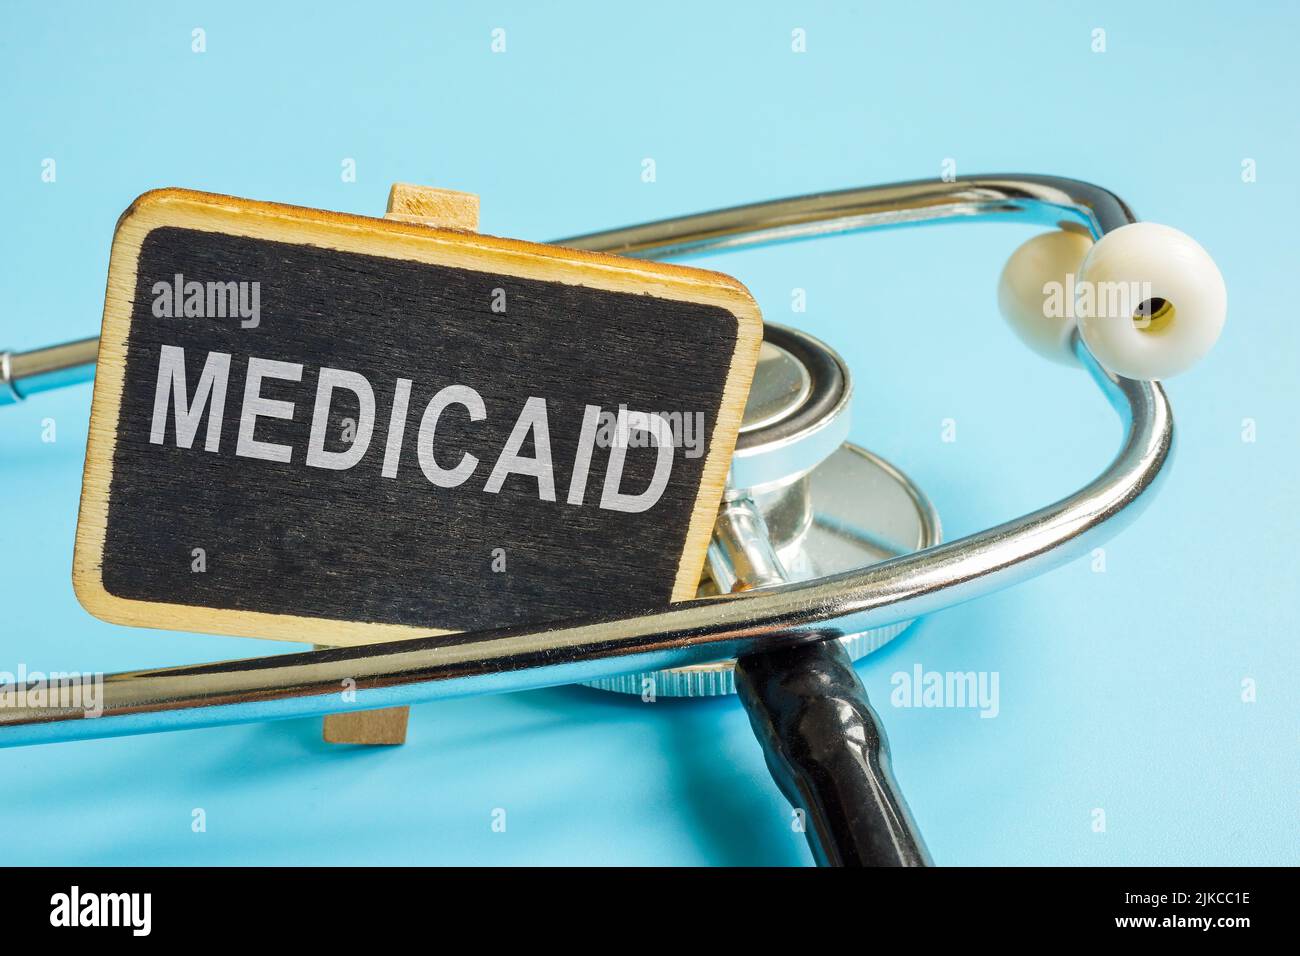 Plate with word Medicaid and a stethoscope. Stock Photo